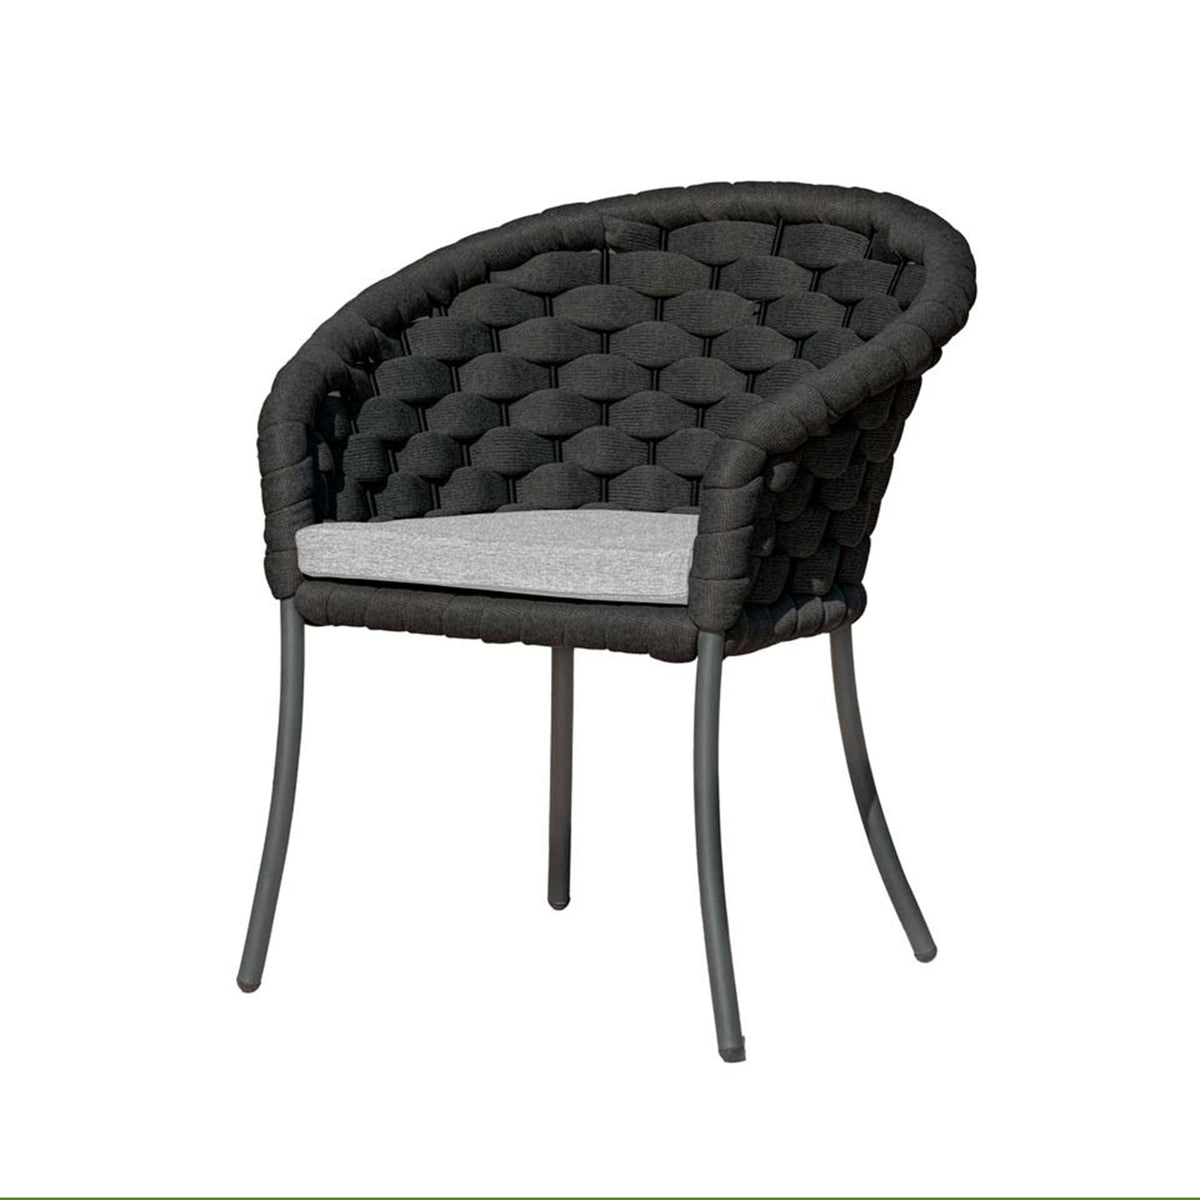 Alexander Rose Cordial Luxe Outdoor Dining Chair with Cushion - Dark Grey